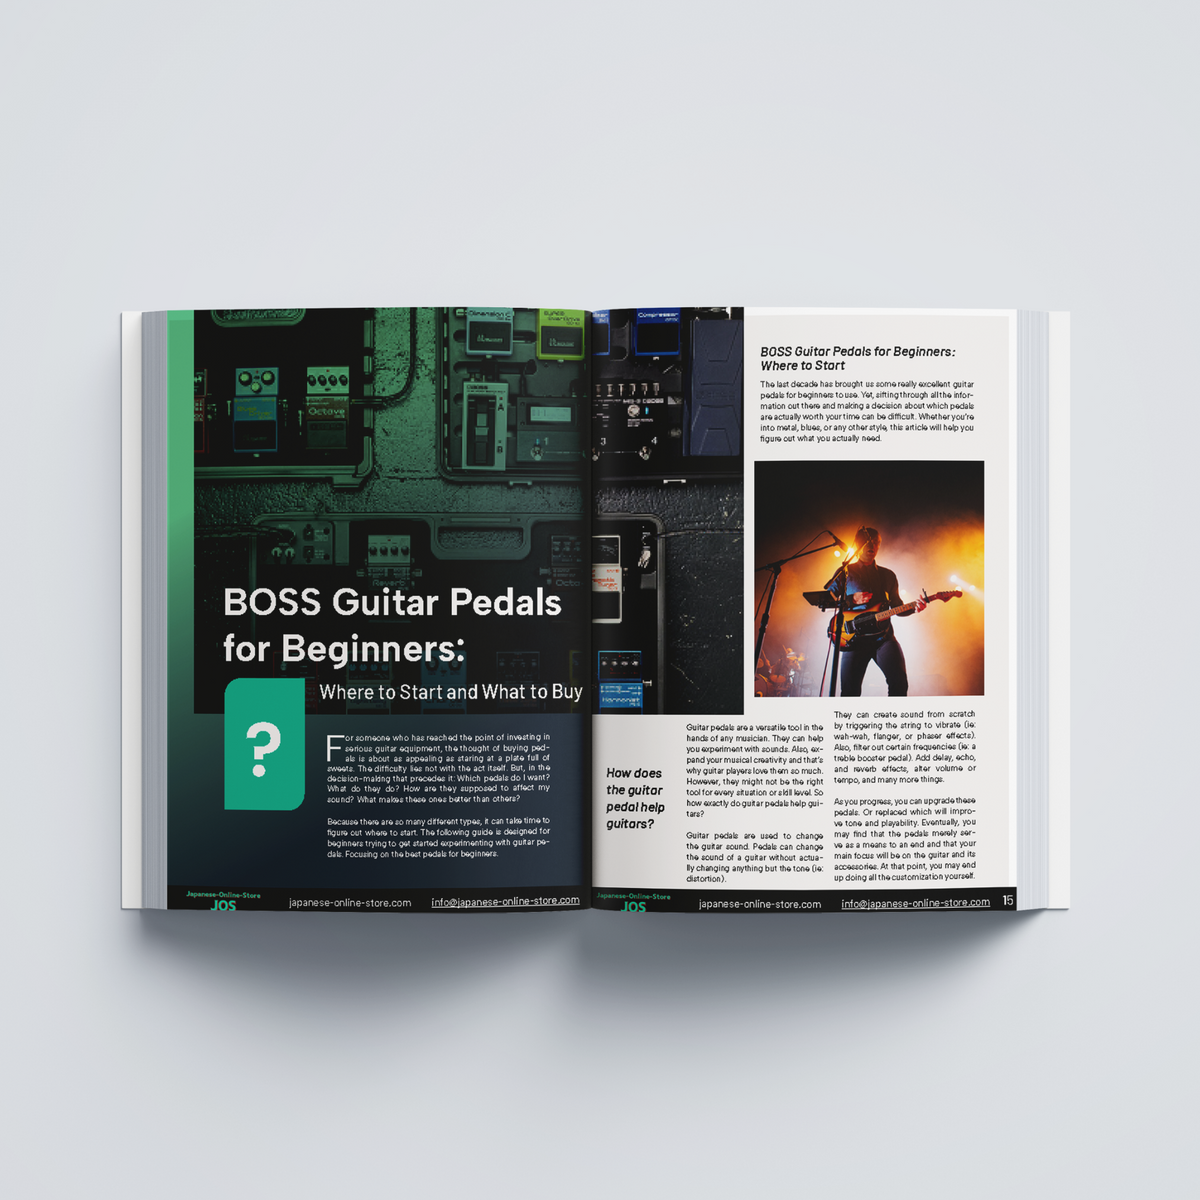 BOSS Guitar Pedals Buying Guide eBook — 167 Pages of Comprehensive Knowledge!